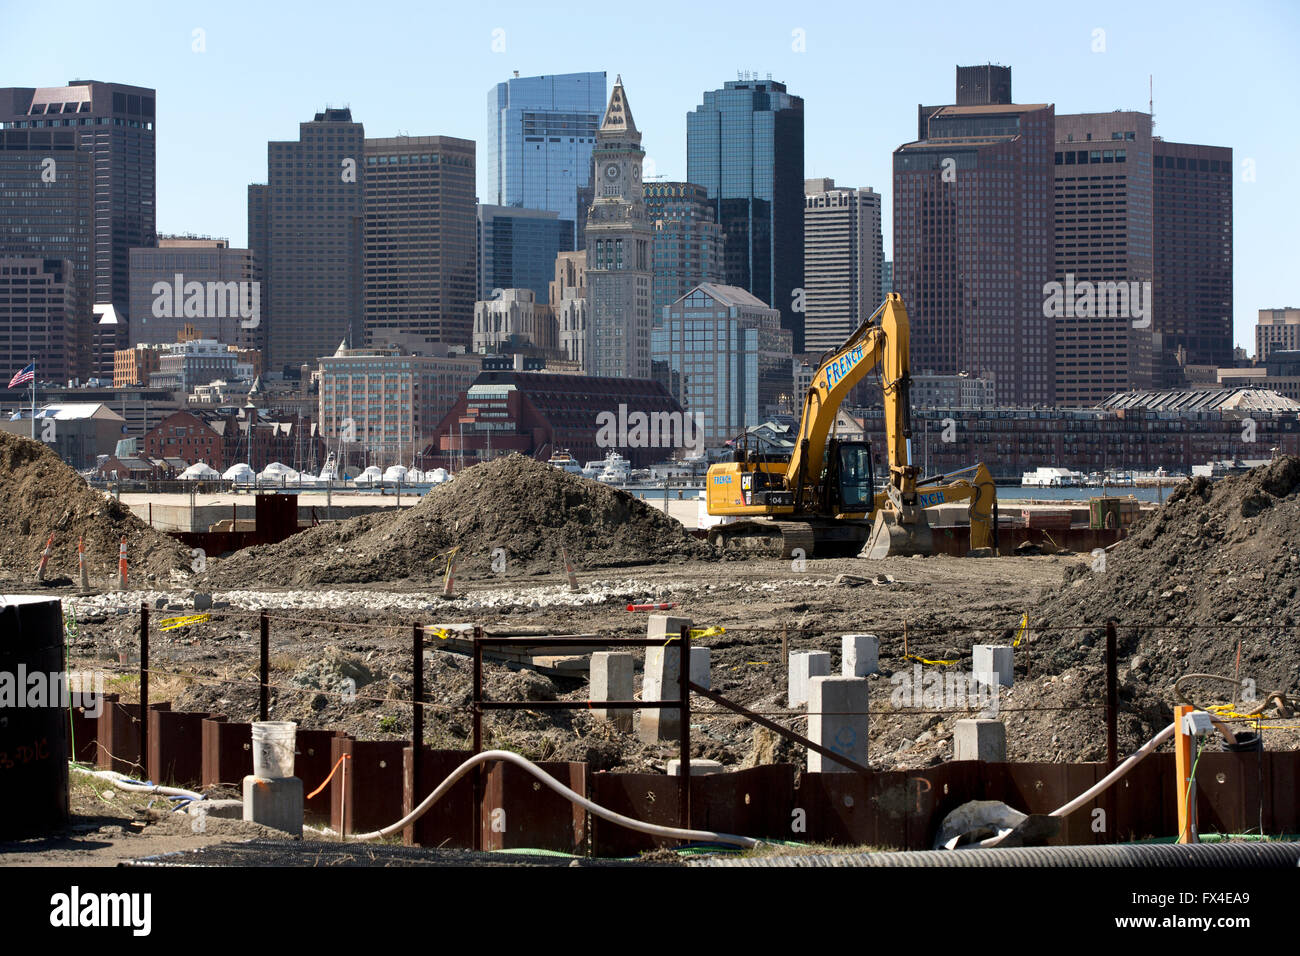 Housing construction site known as Portside at East Pier, East Boston, Massachusetts, USA Stock Photo